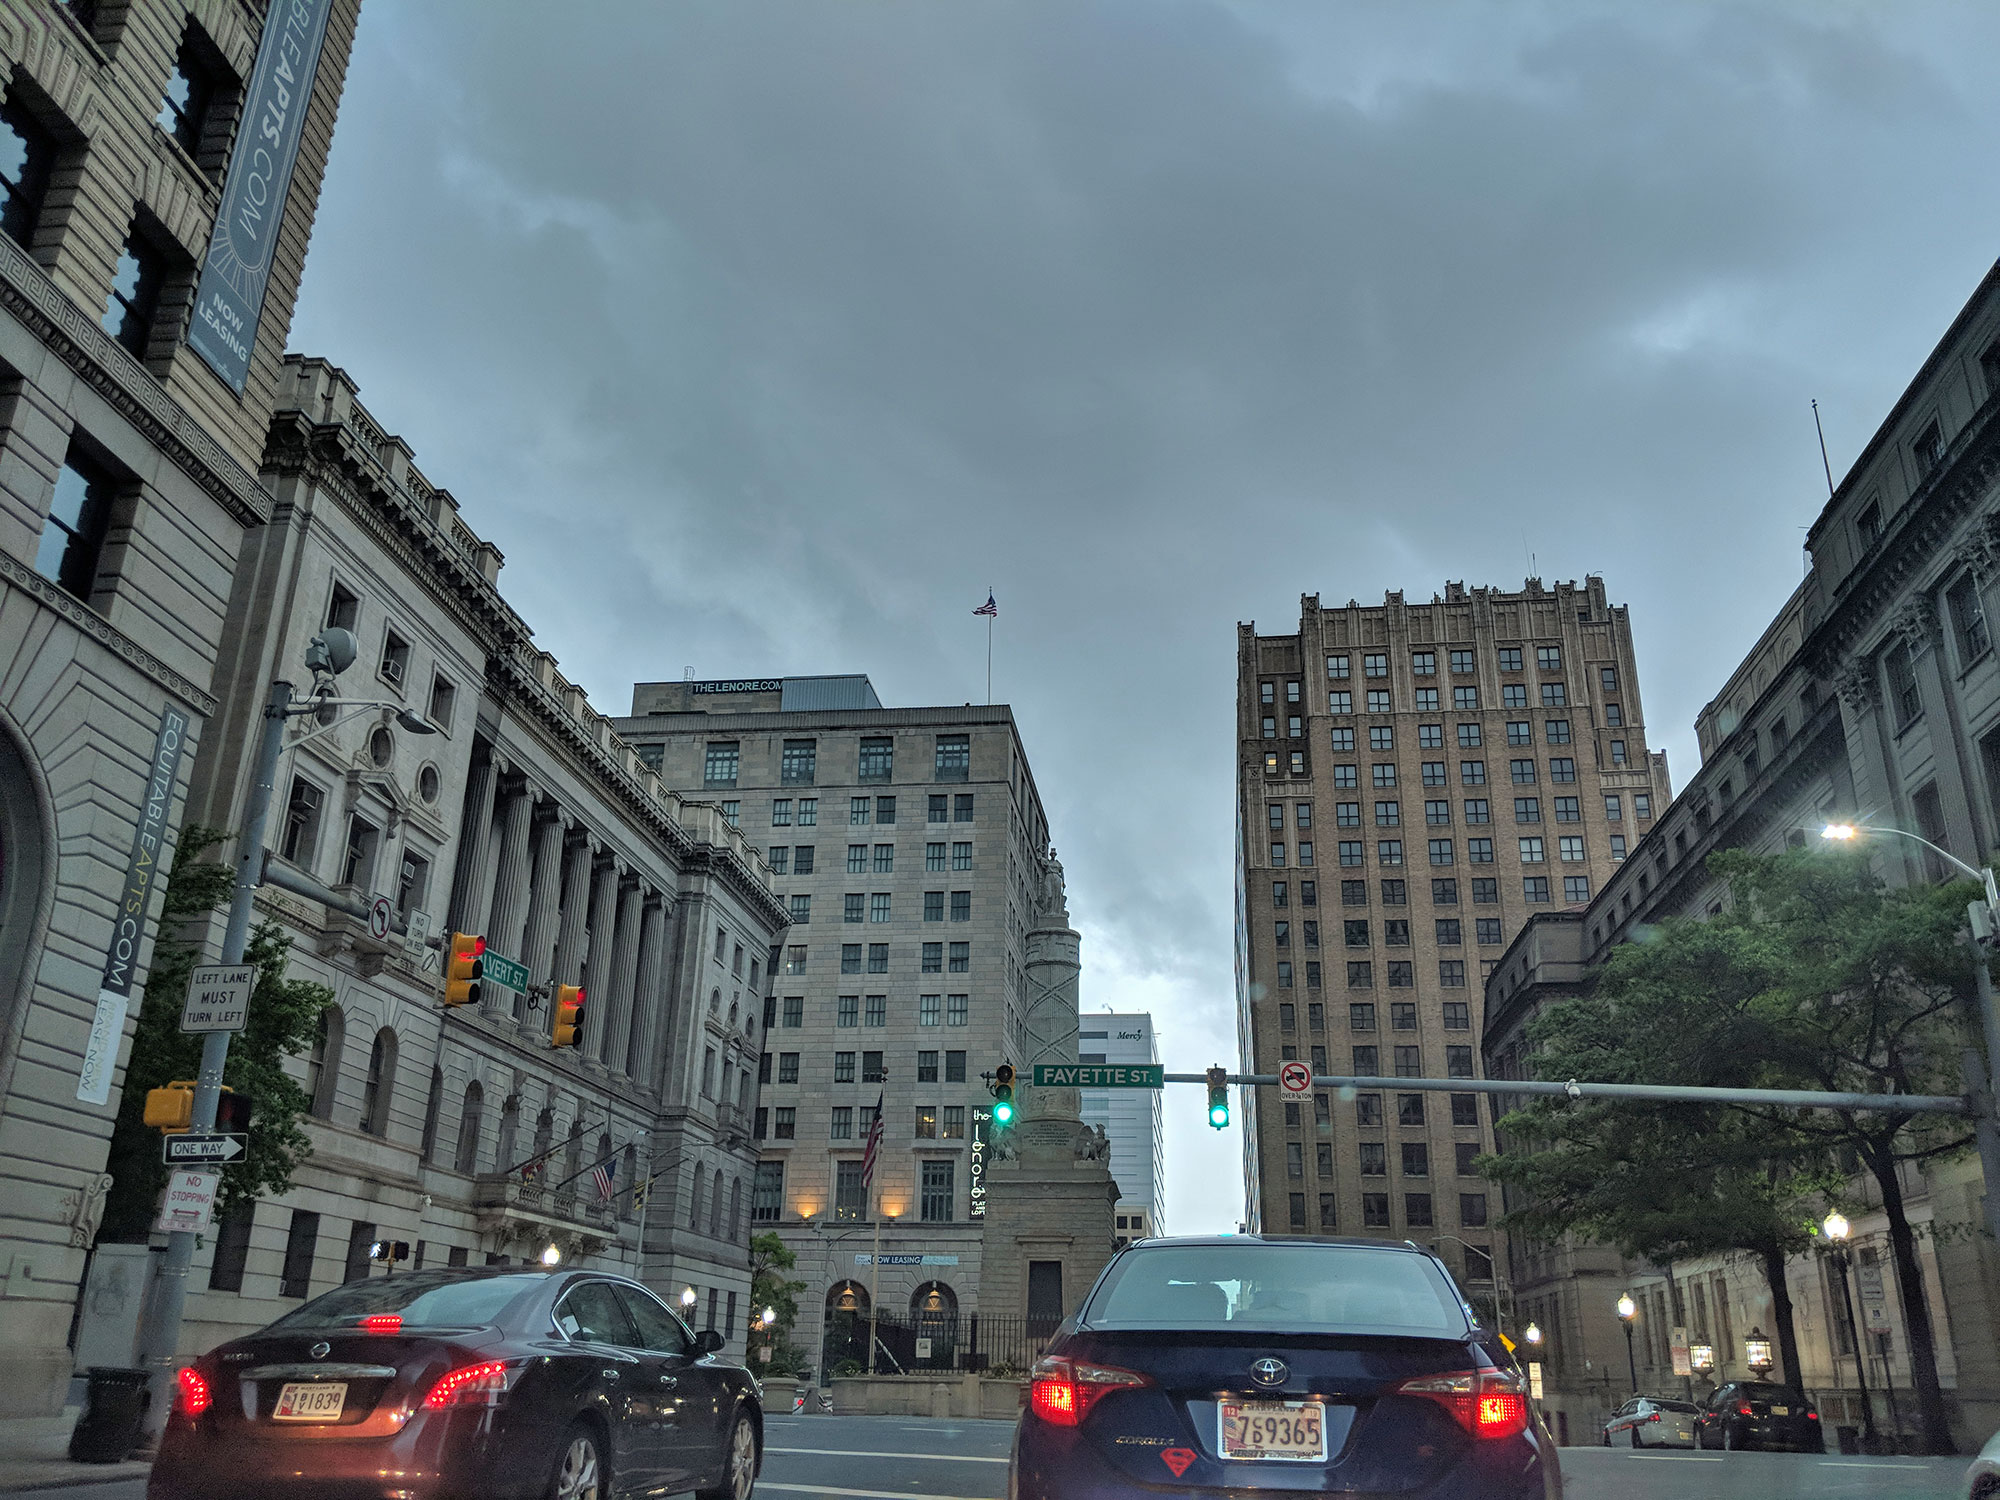 Baltimore's downtown right before a massive rainstorm.